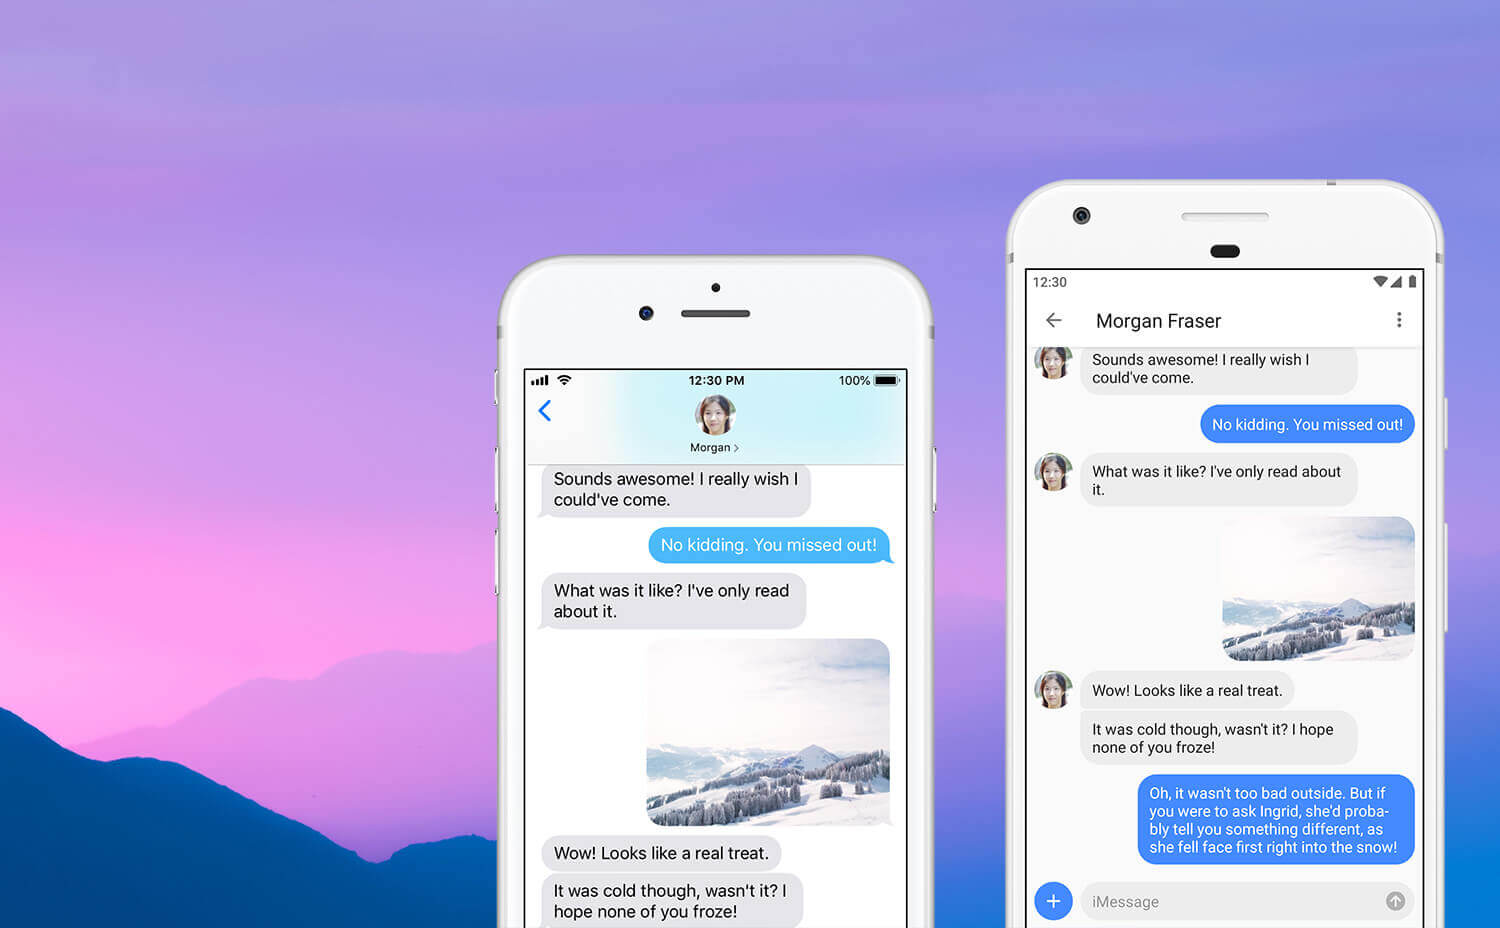 iMessage Features - Instant Messaging Services